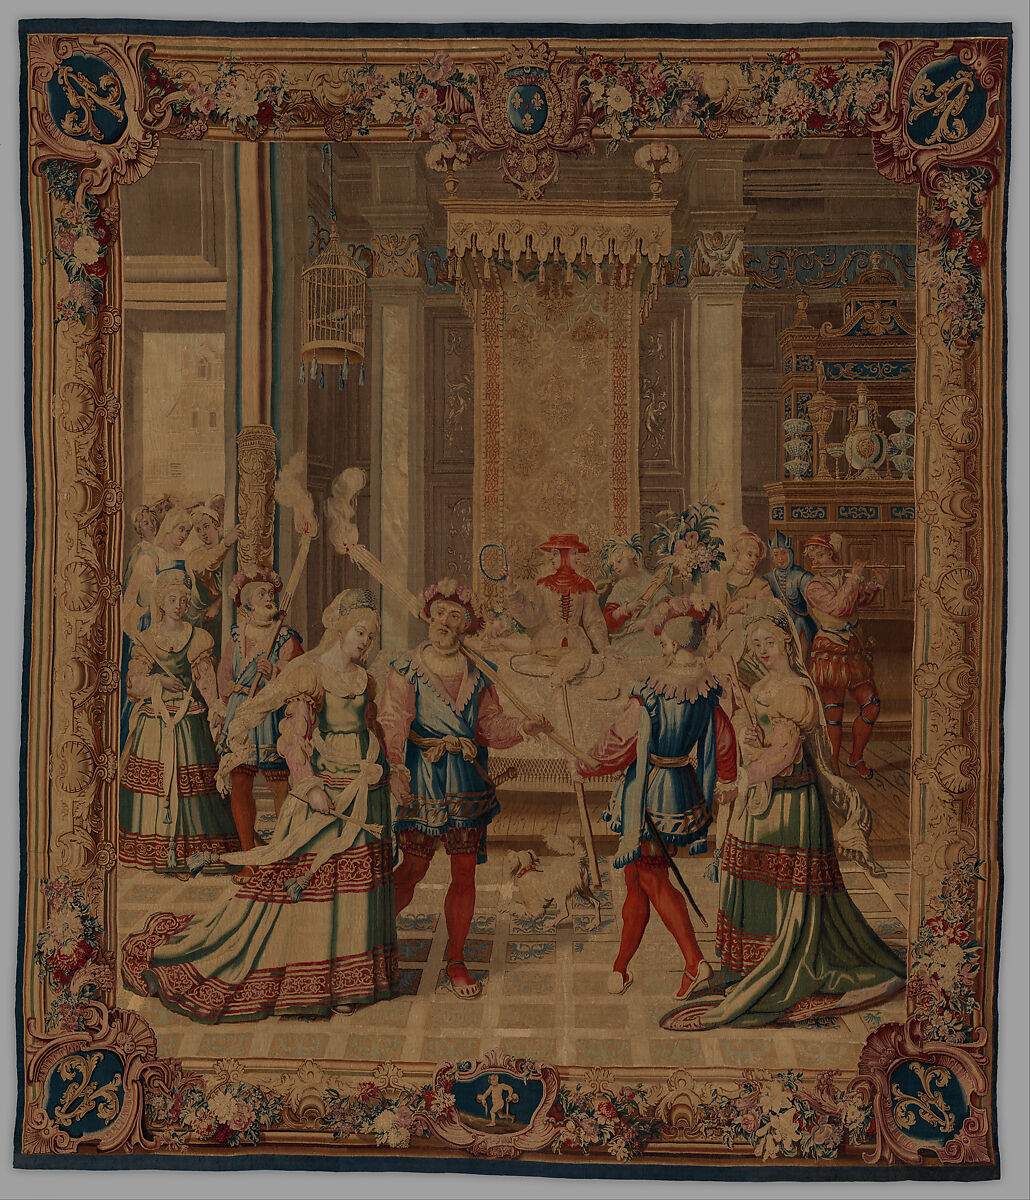 January from a set of The Months of Lucas, Master of the Months of Lucas  Netherlandish, Wool, silk (20-21 warps per inch, 8-9 per cm.), French, Paris